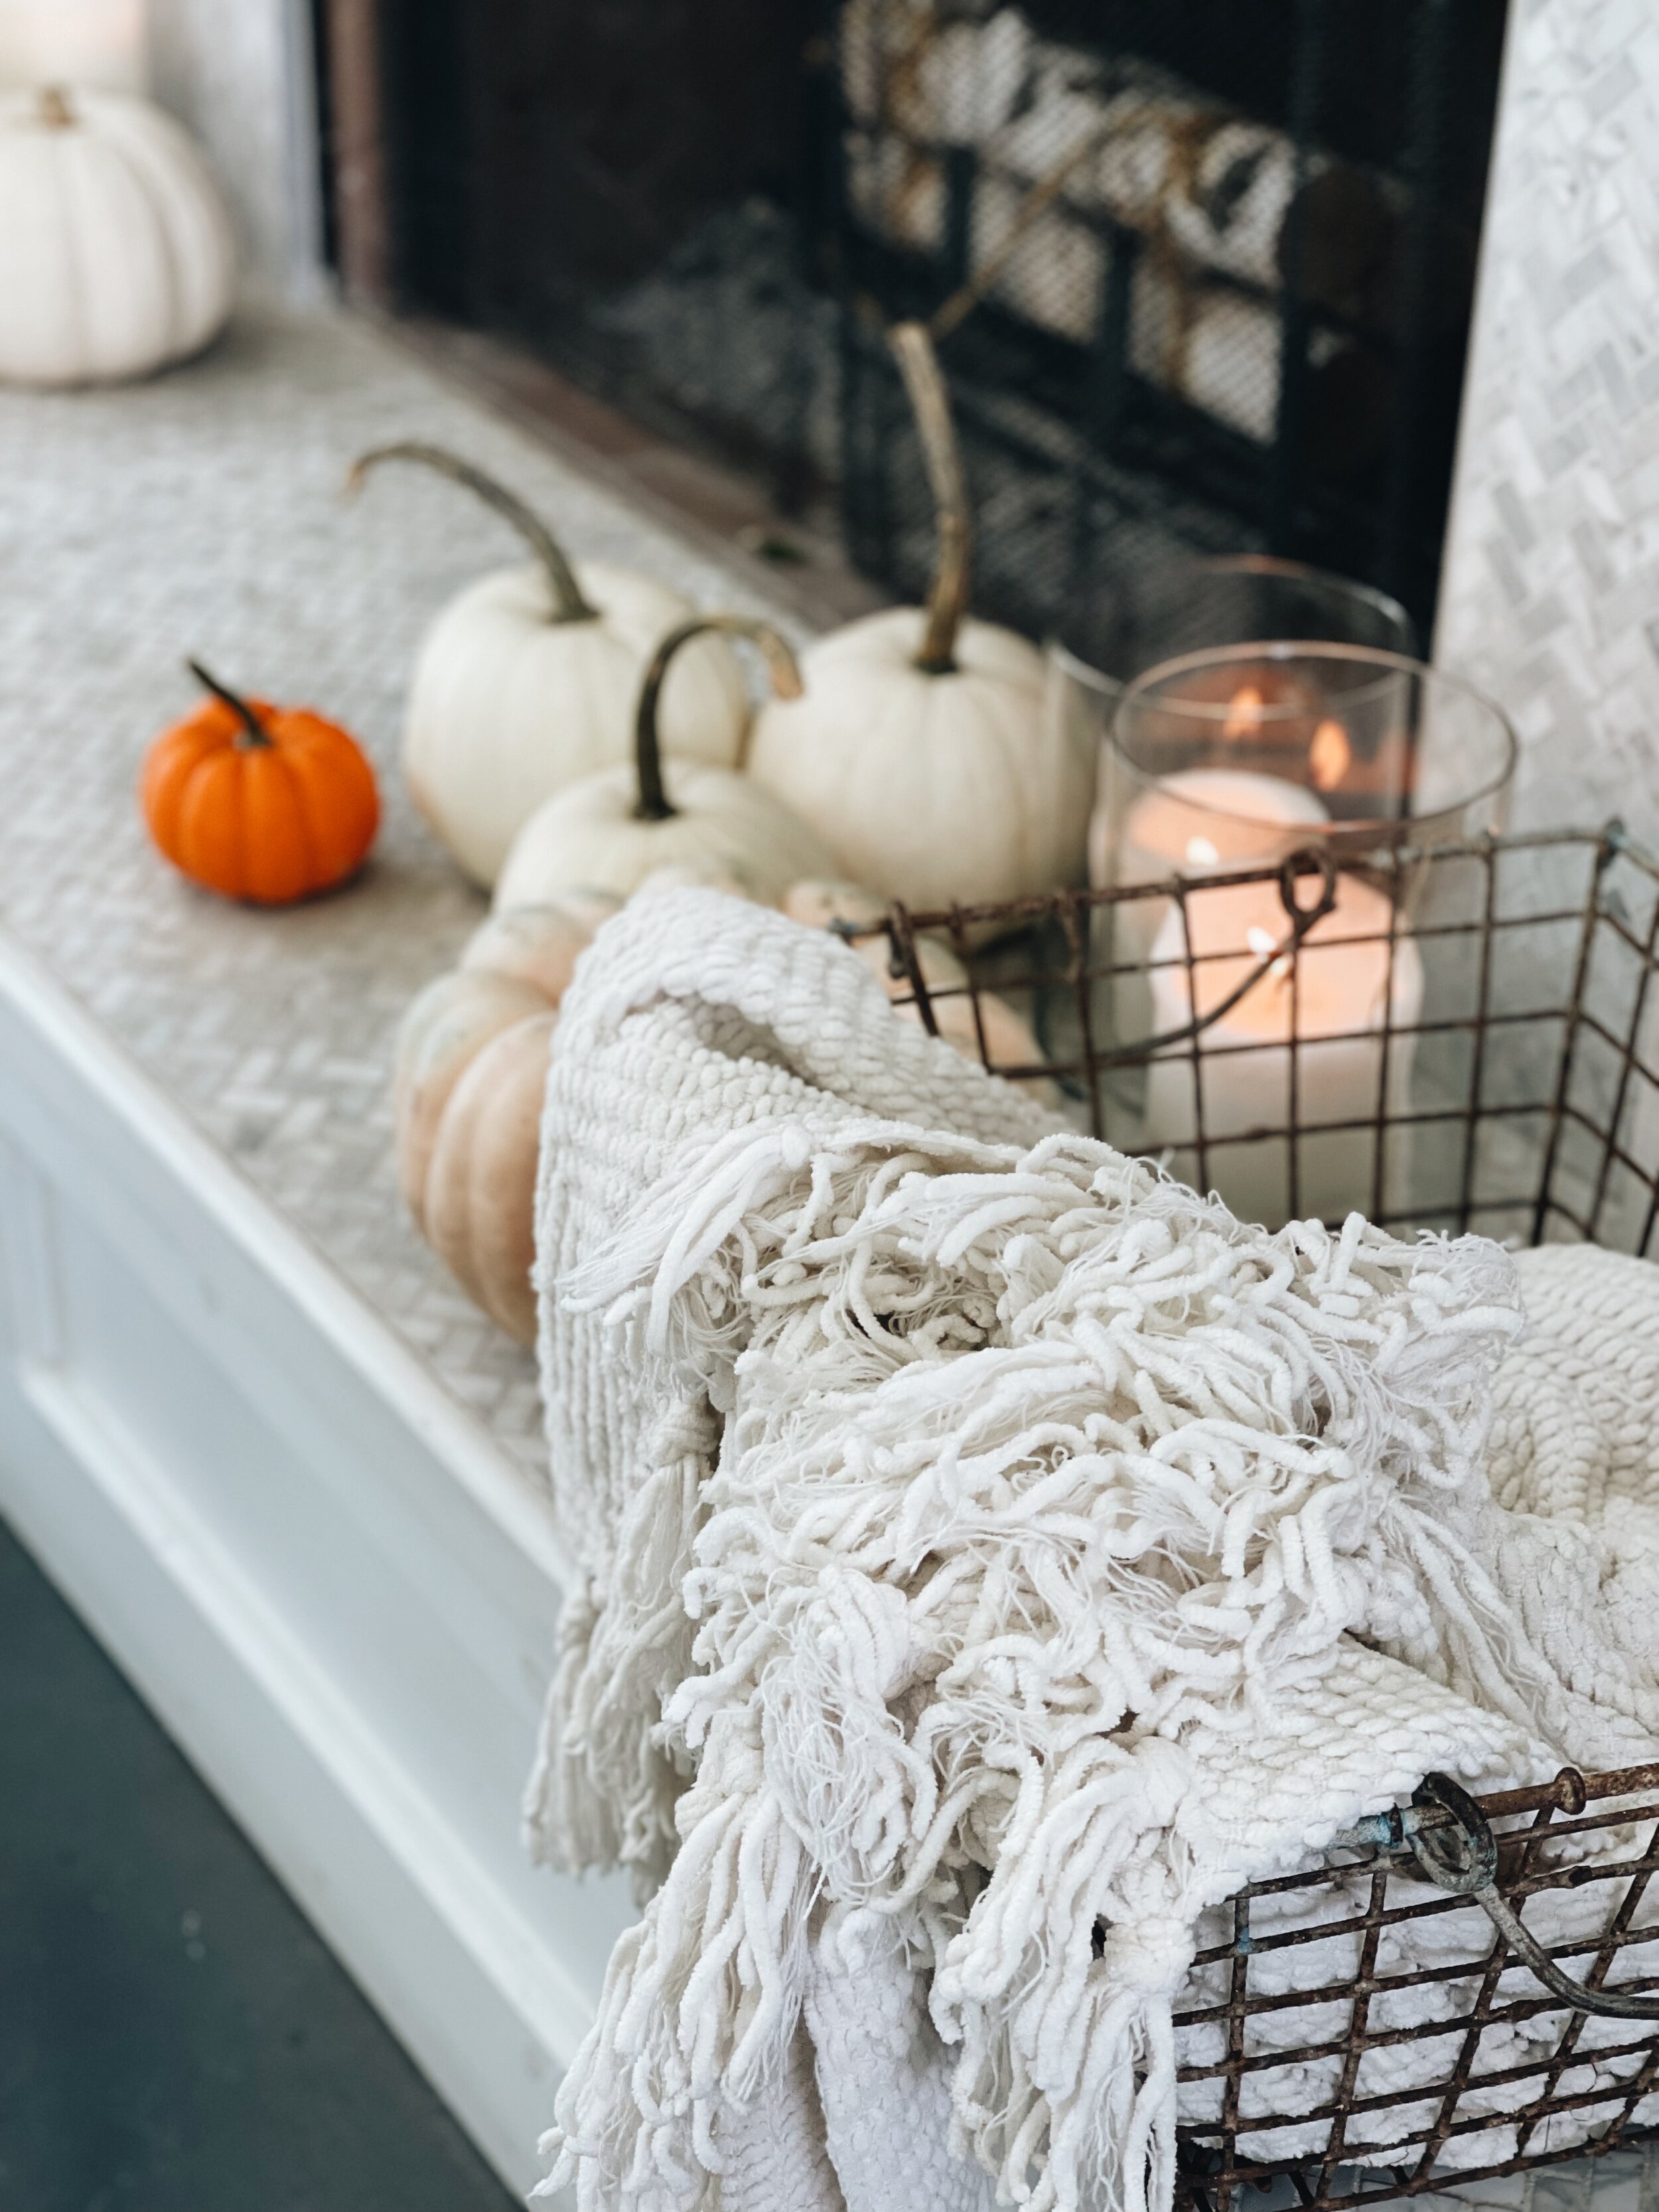 Create A Cozy Fall Ambiance By Making Your Own Beeswax Candles - Azure Farm